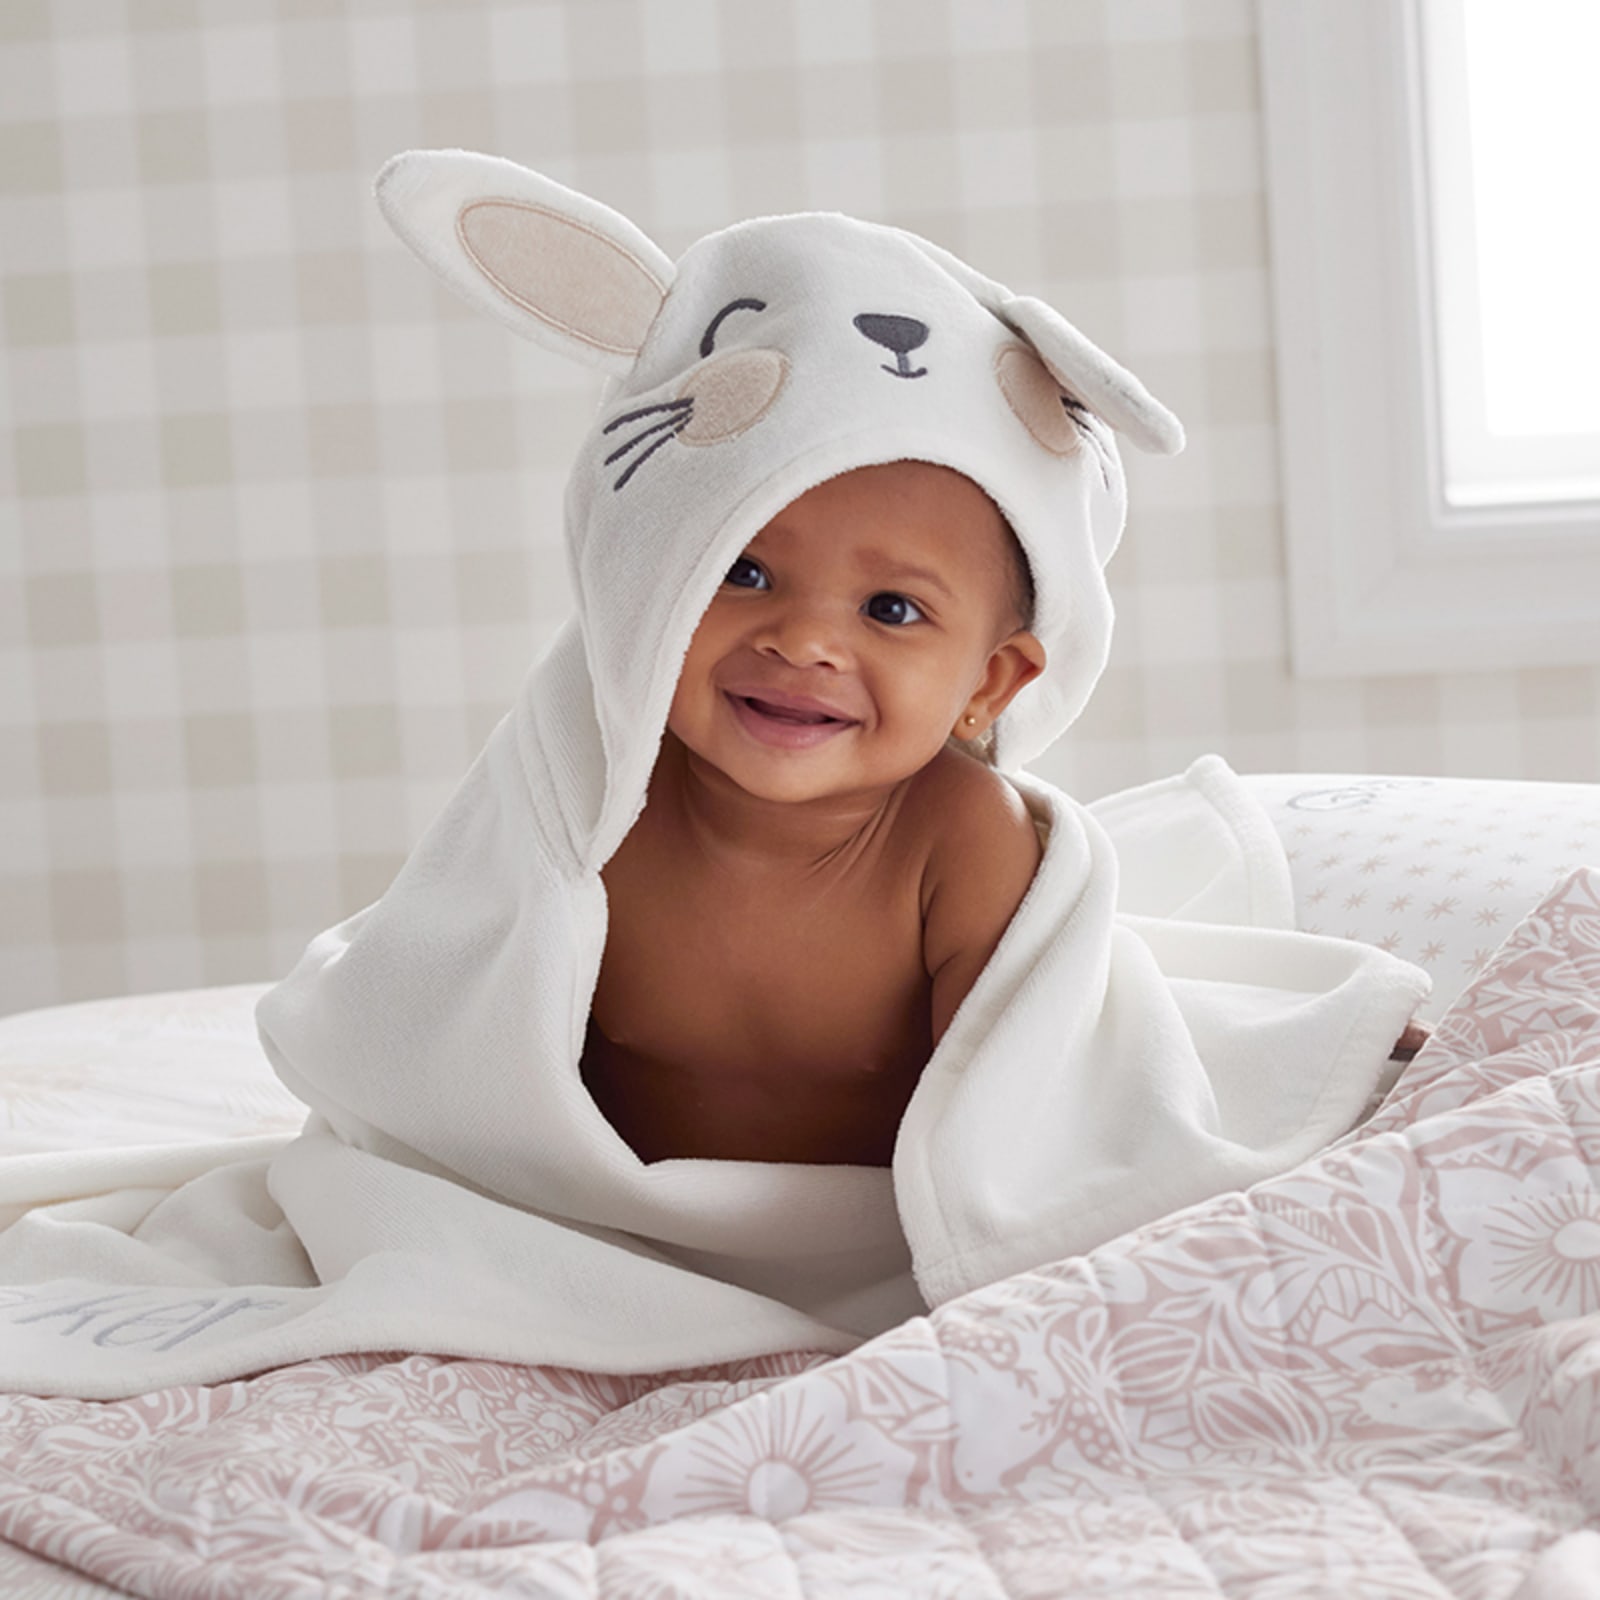 Review: Soft Hooded Baby Towels – The Perfect Bath Time Essential